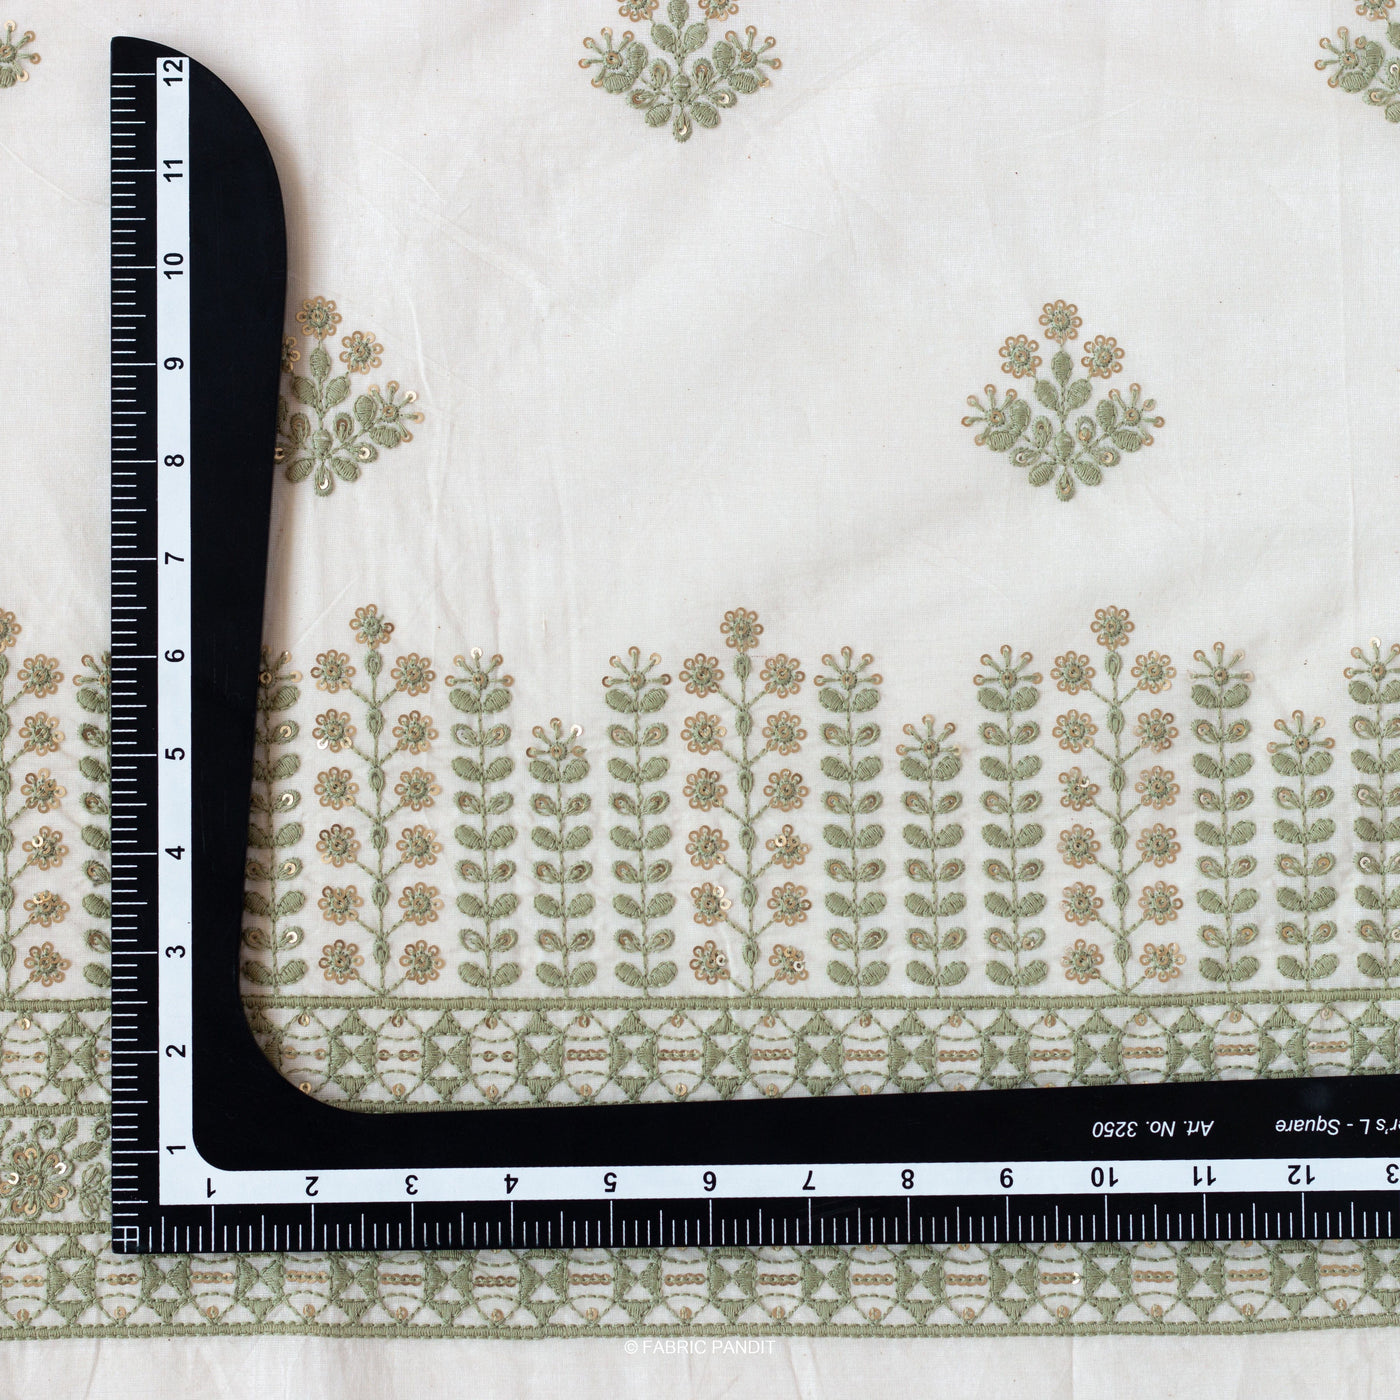 Fabric Pandit Fabric White & Light Green Embroidered Flower Garden Pure Cotton Fabric (Width 46 inches)